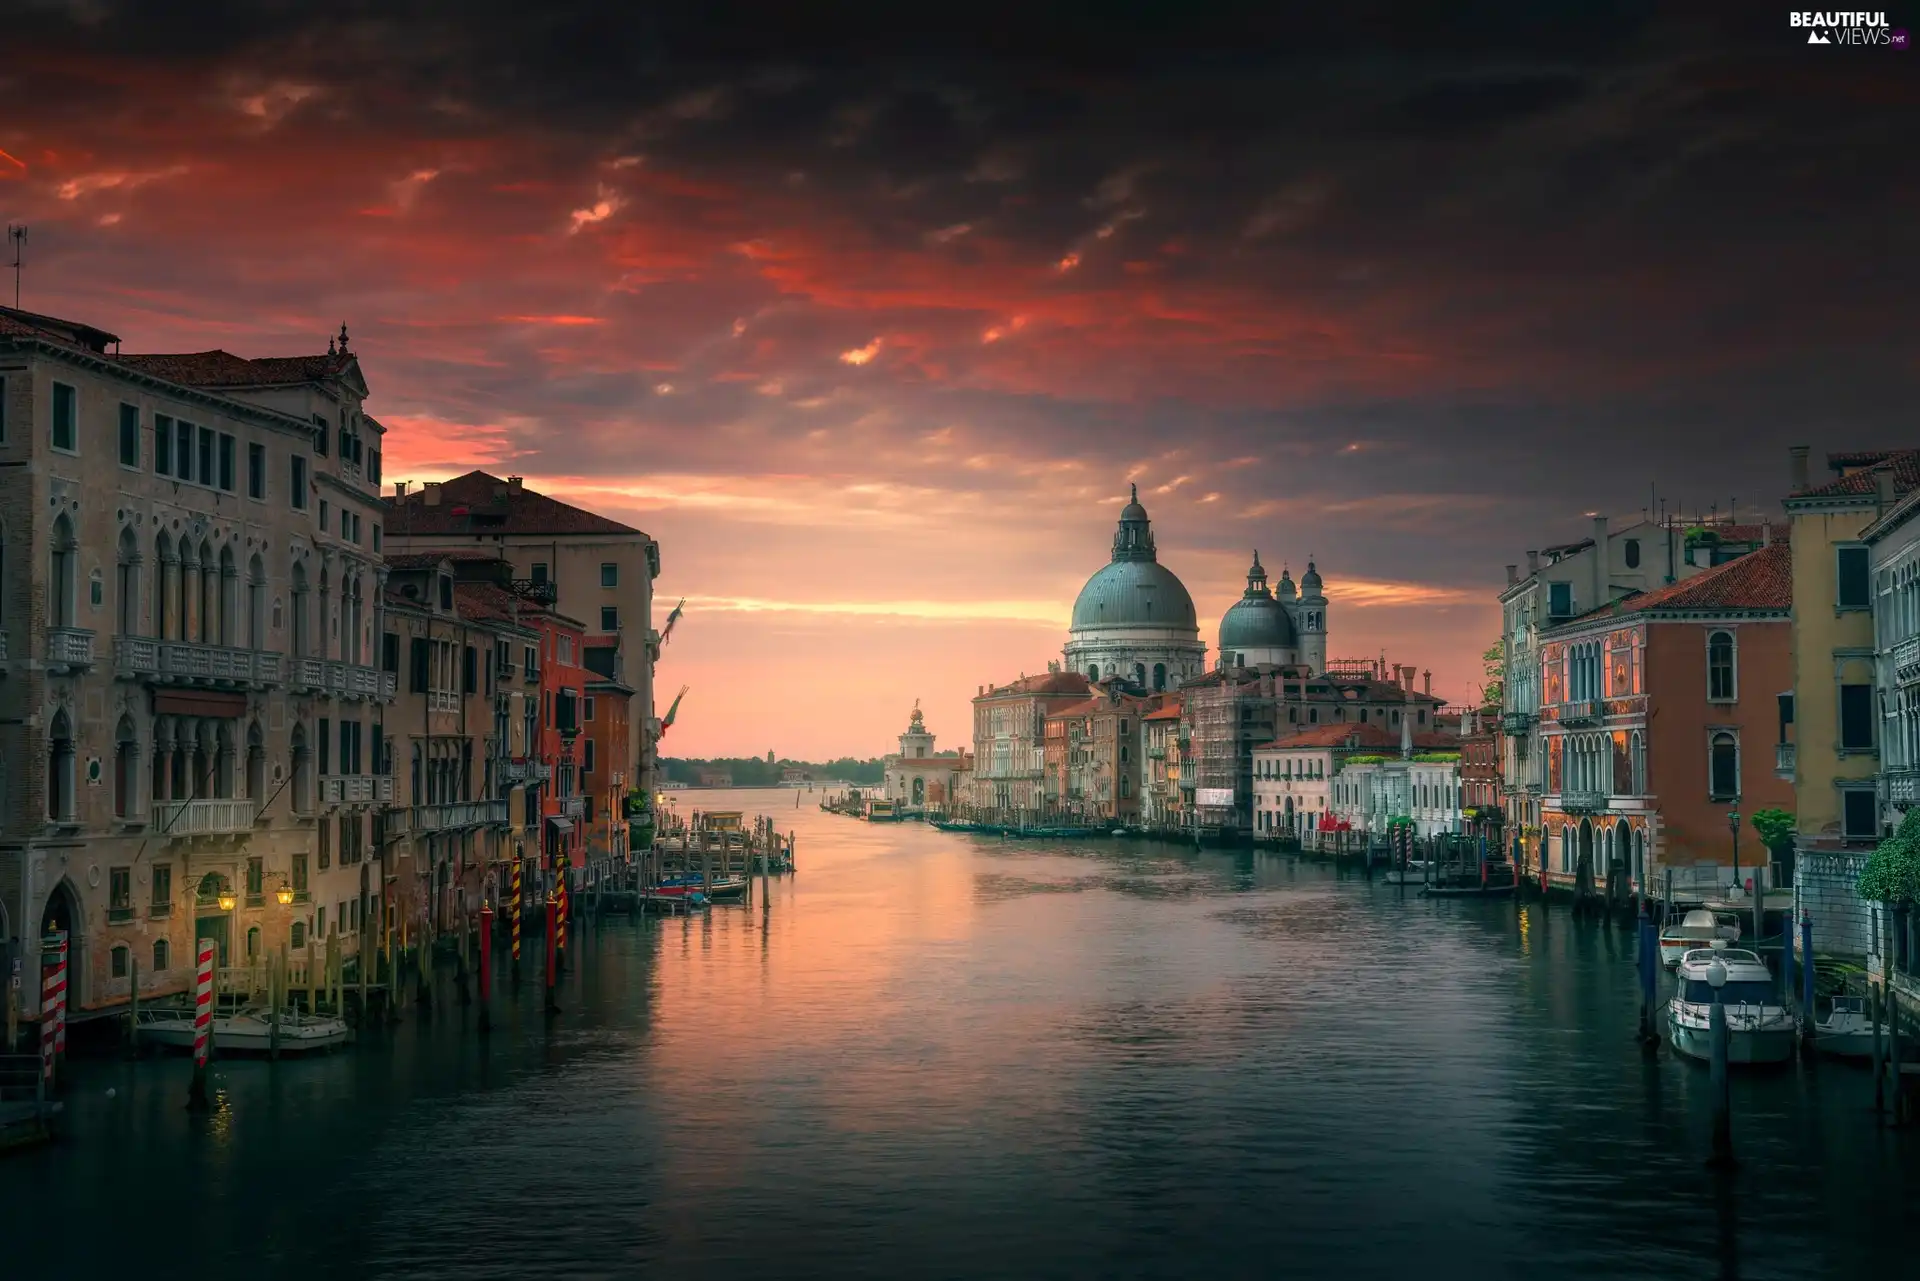 Basilica of St. brand, Italy, Canal Grande, Great Sunsets, canal, Venice